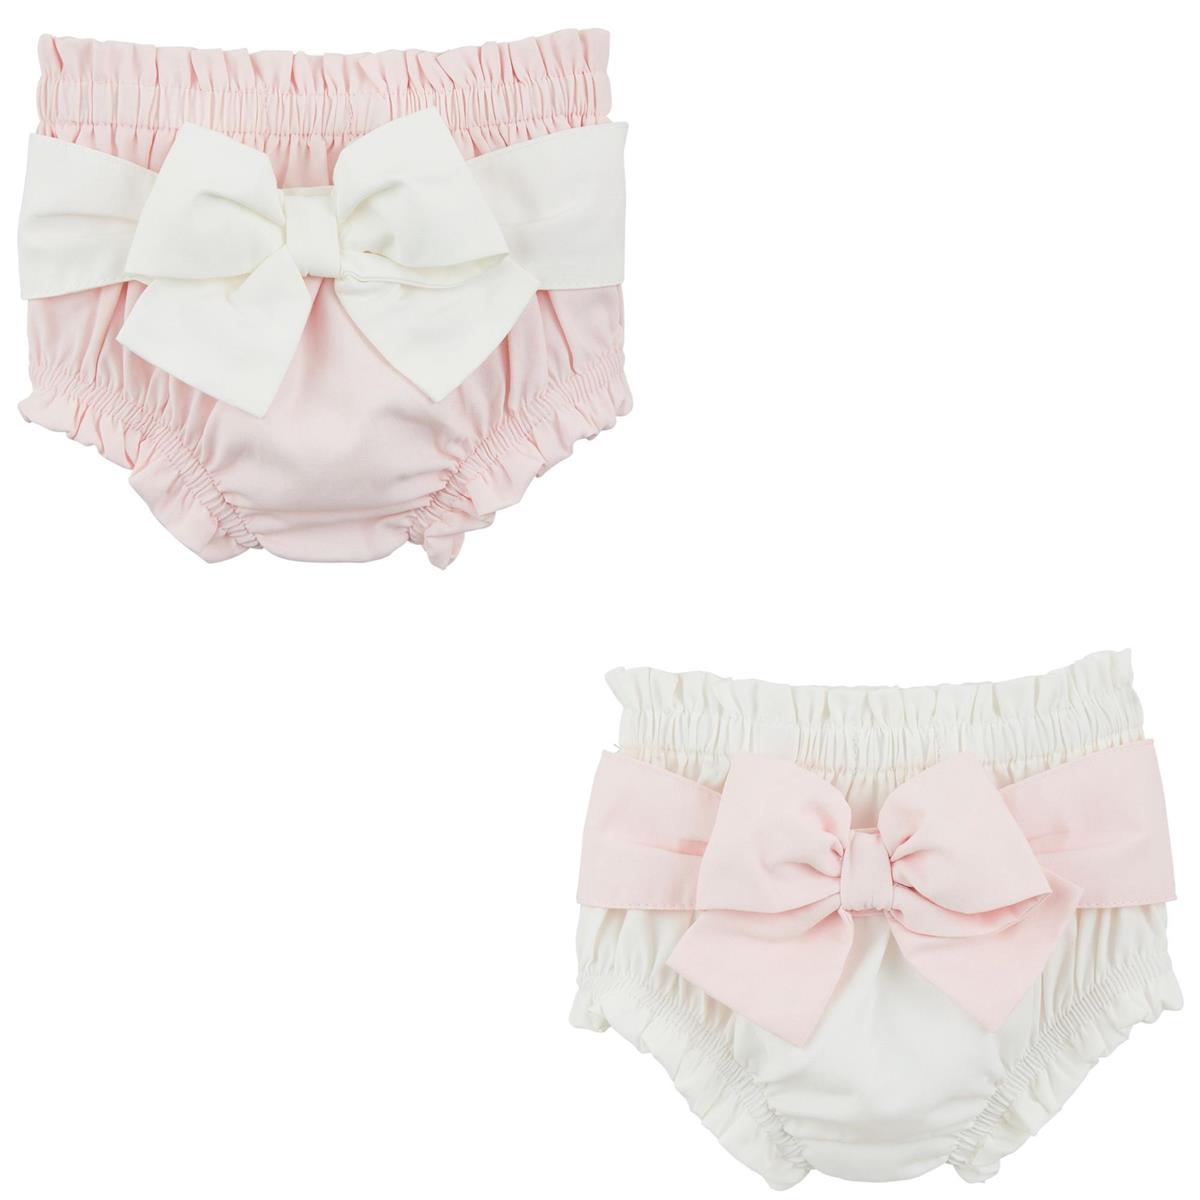 Mudpie- Bow Diaper Covers #10680001